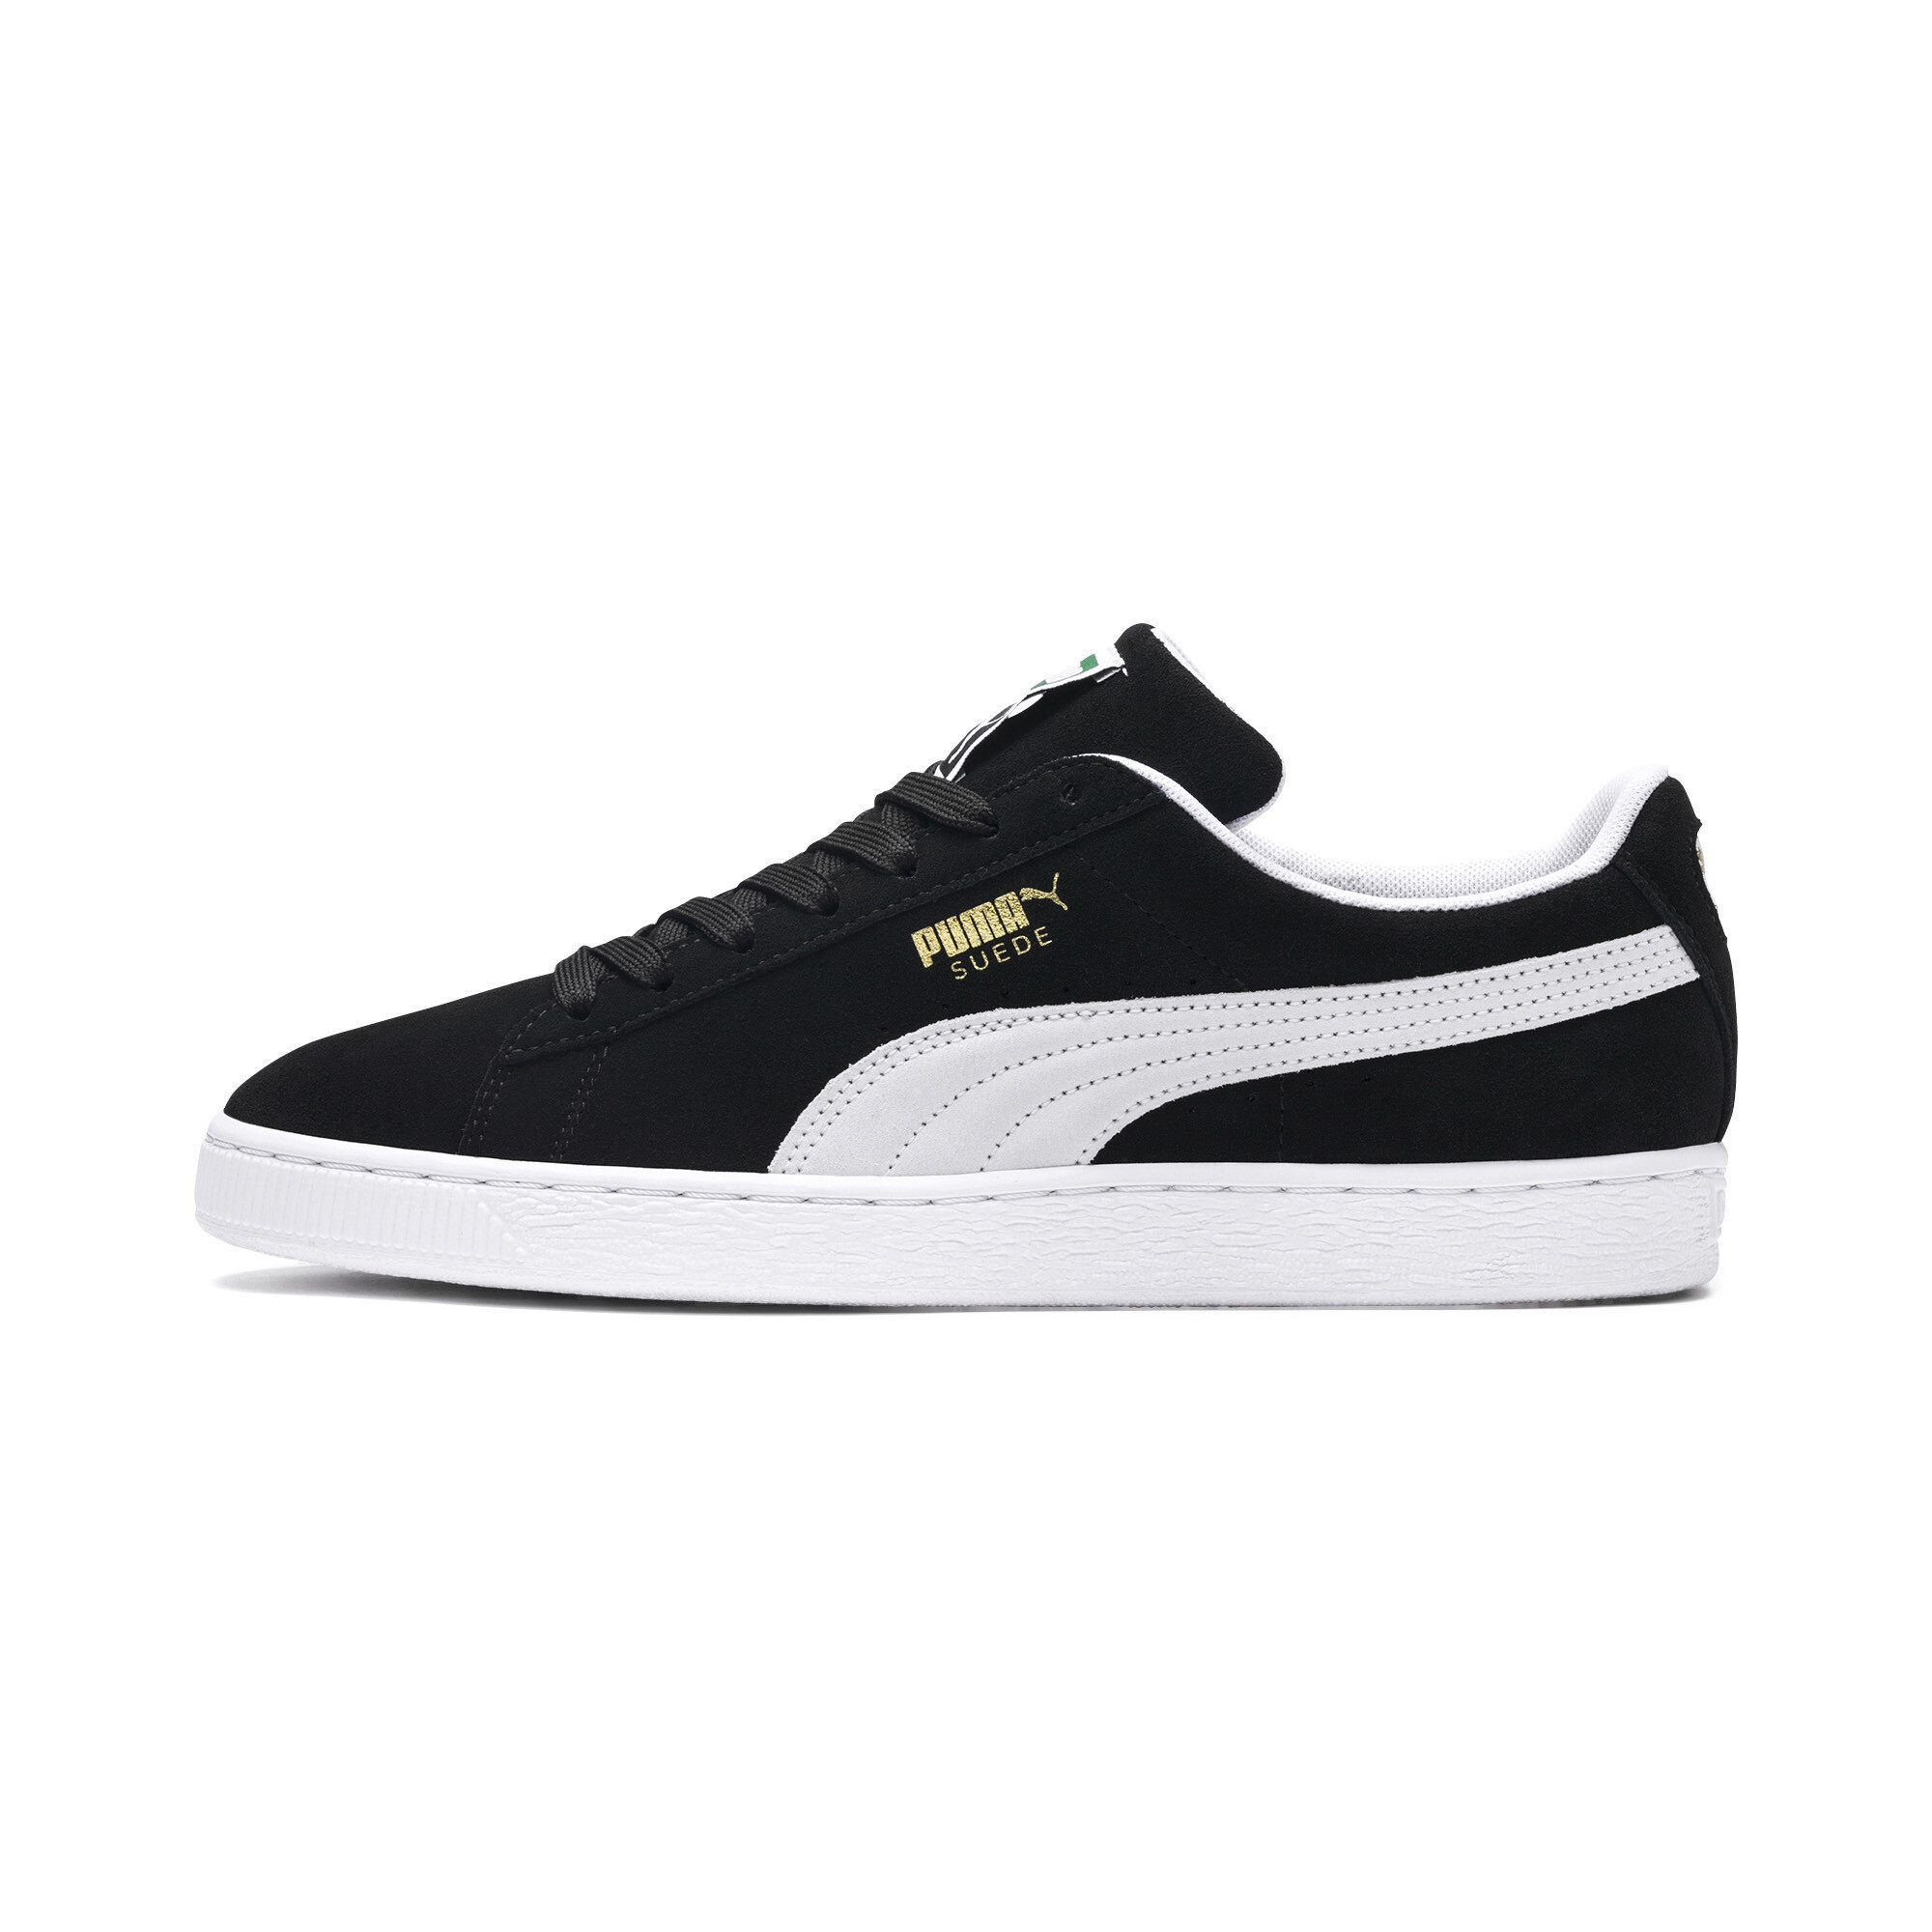 puma suede sneakers classic sneaker womens shoes kylie shoe jenner casual celebrity trainers approved ads instyle